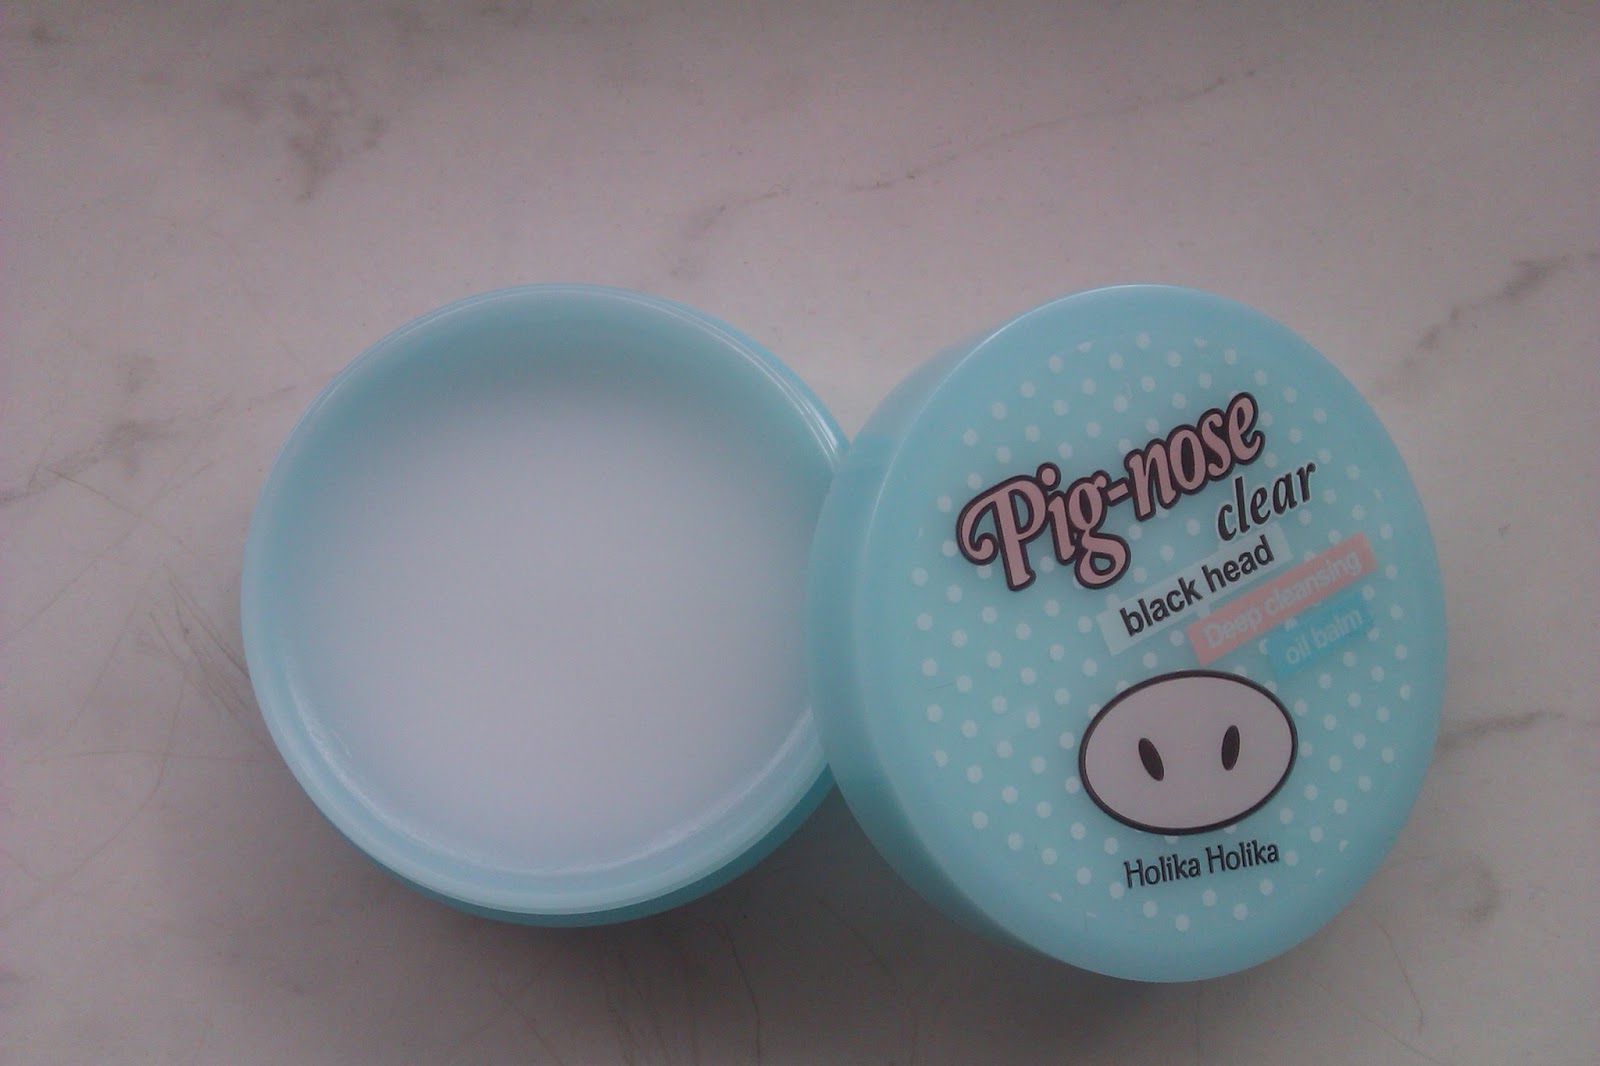 pig nose clear blackhead deep cleansing oil balm review